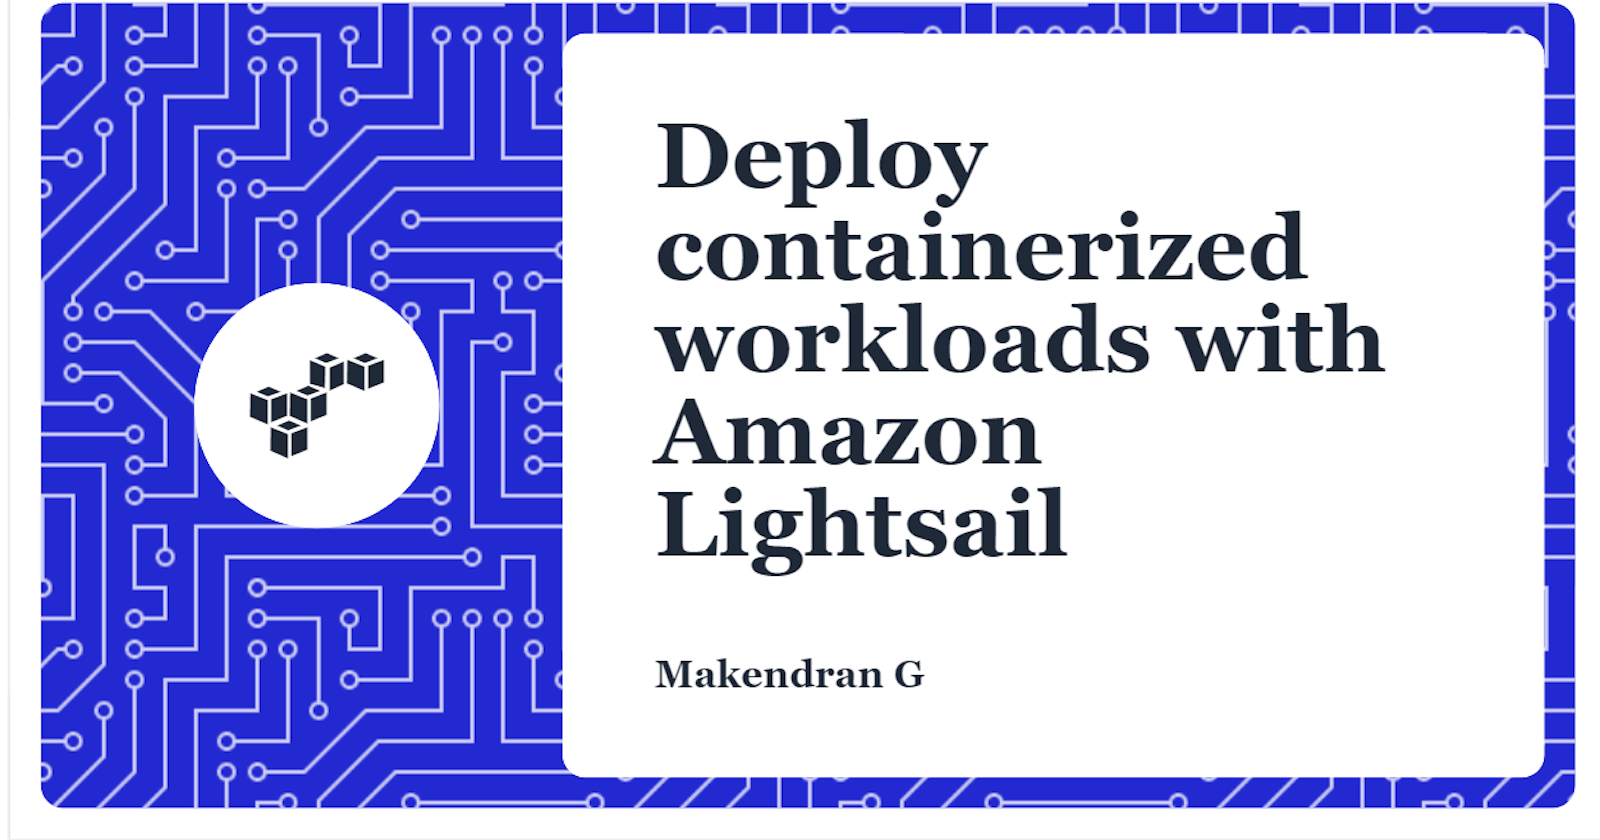 Deploy containerized workloads with Amazon Lightsail